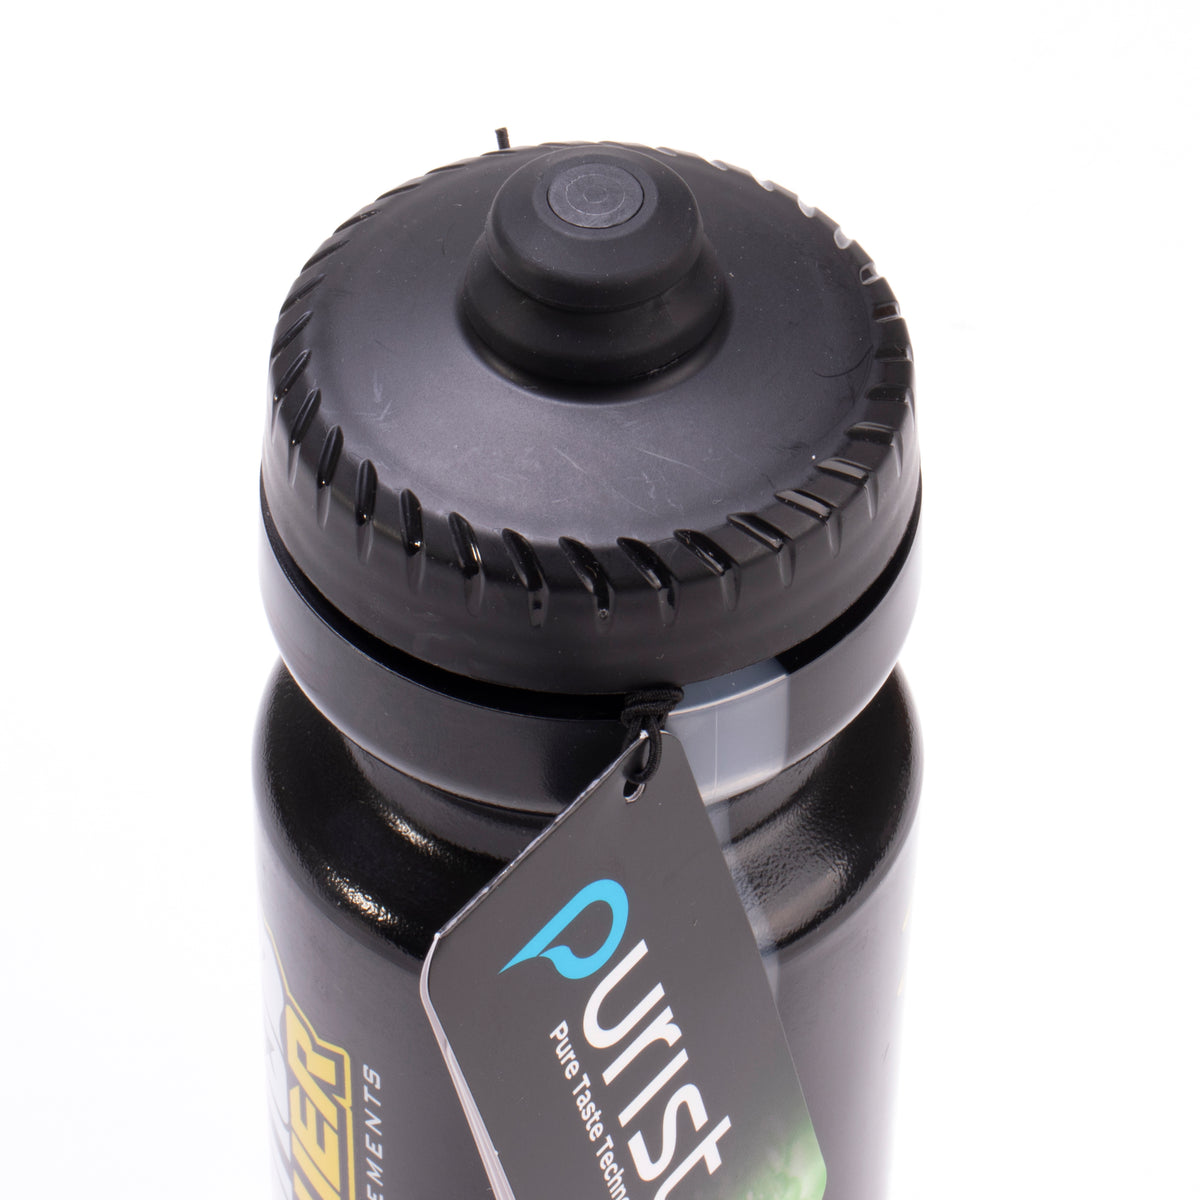 22oz. BLACK Pro Cycling Bottle - Made by Specialized